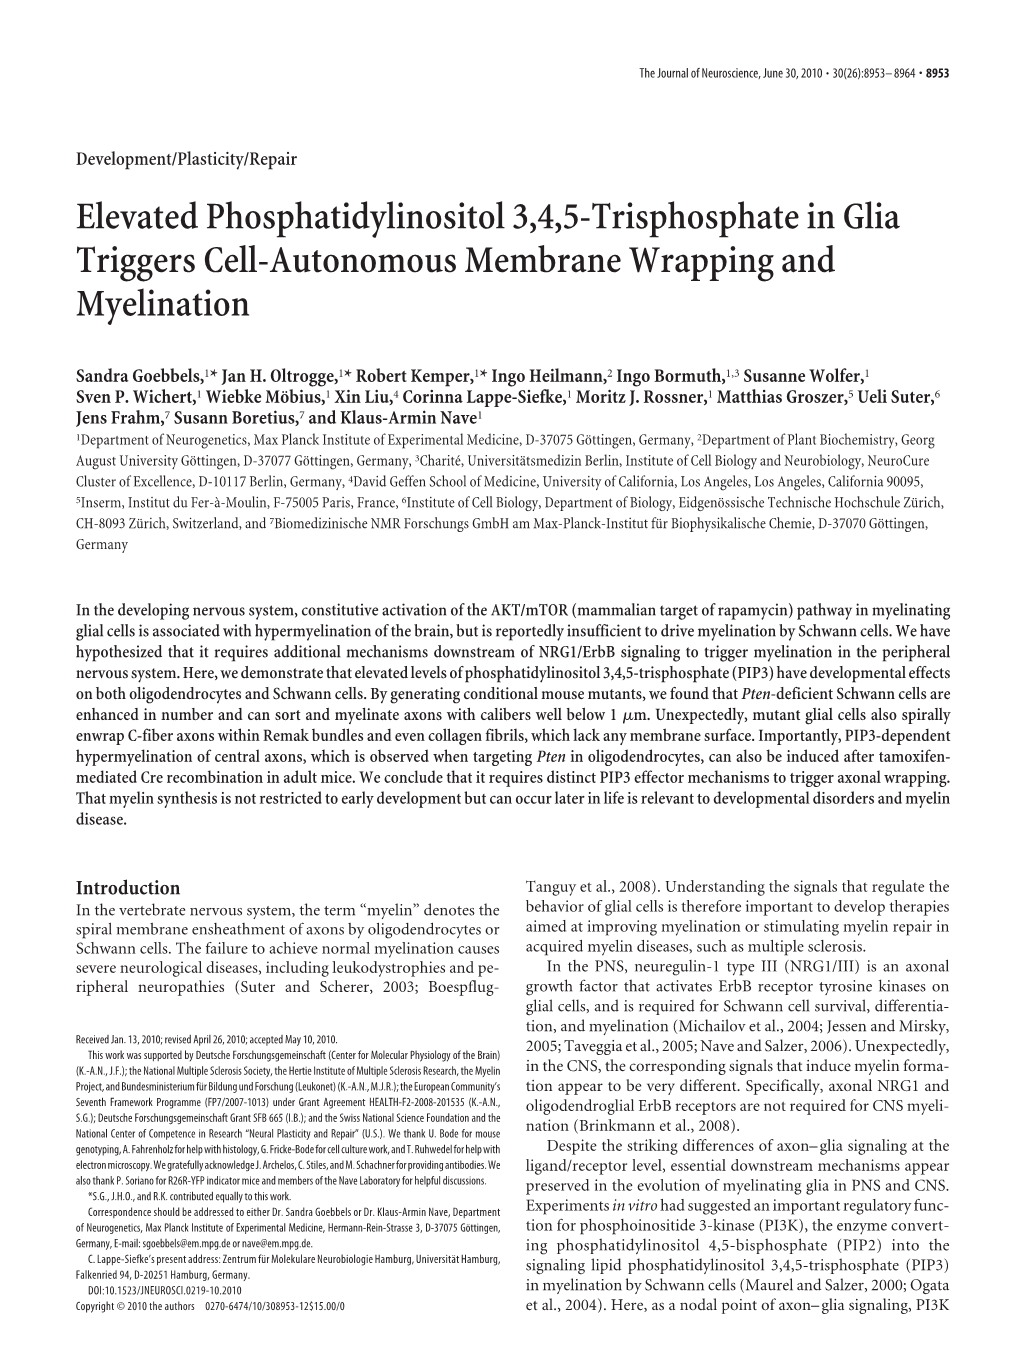 Elevated Phosphatidylinositol 3,4,5-Trisphosphate in Glia Triggers Cell-Autonomous Membrane Wrapping and Myelination